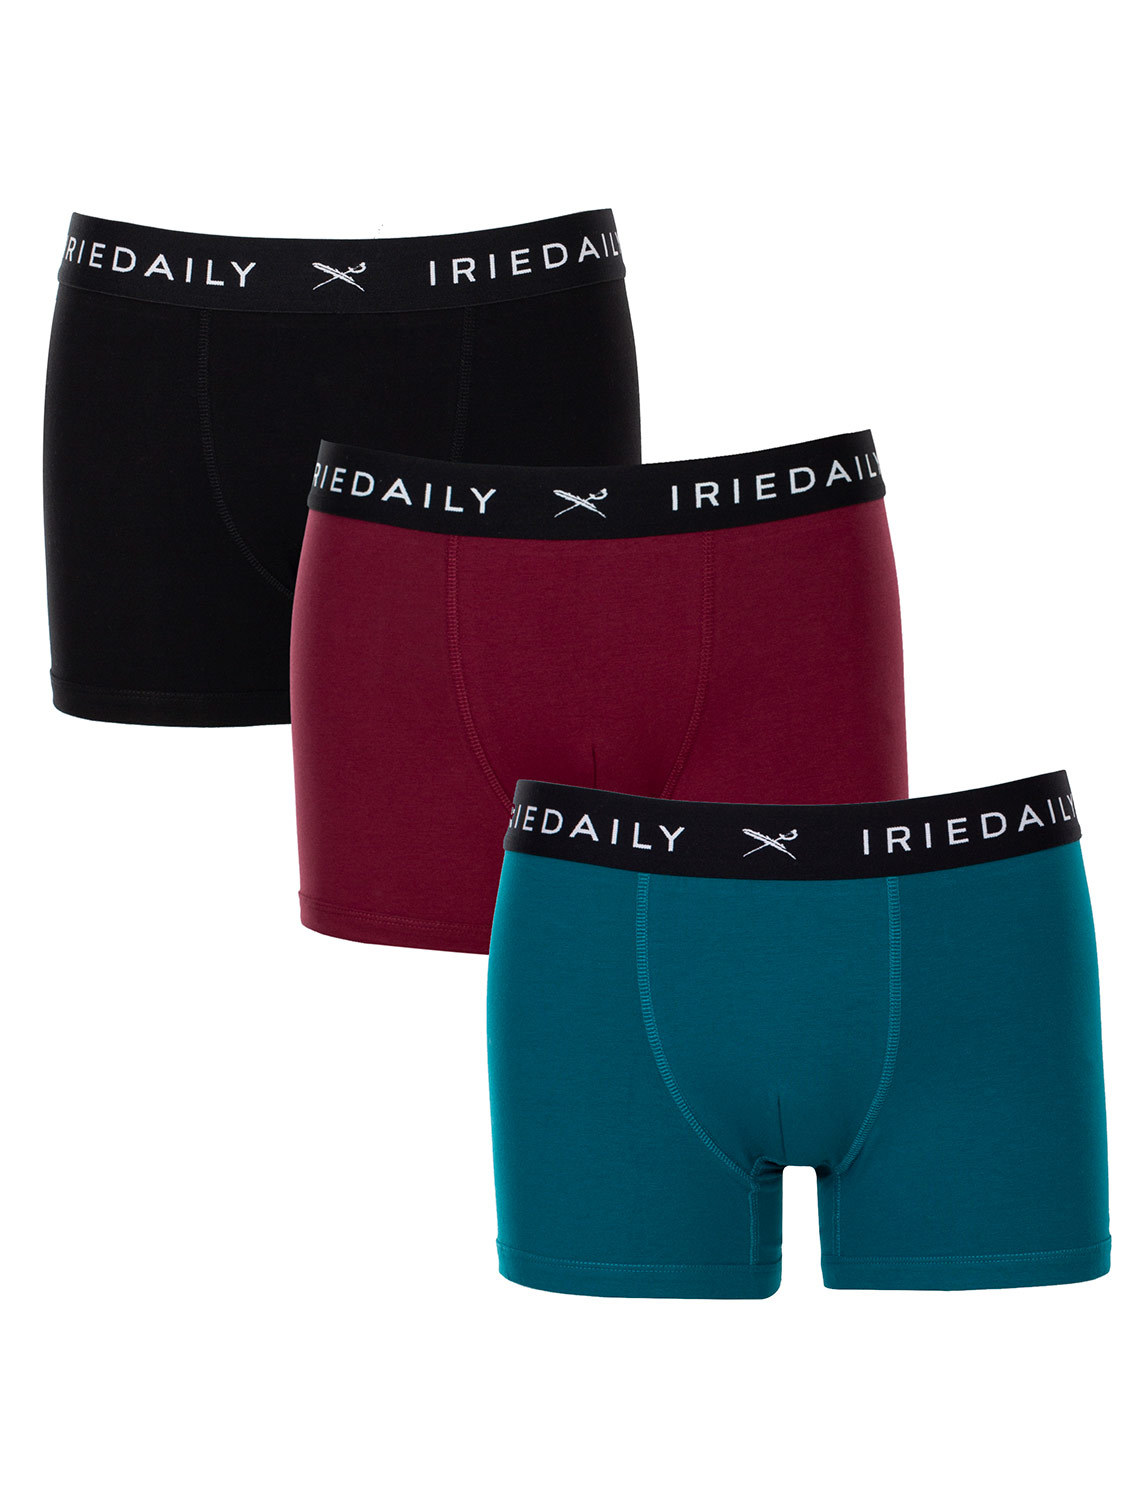 Daily Flag Trunk Pack [multi color]